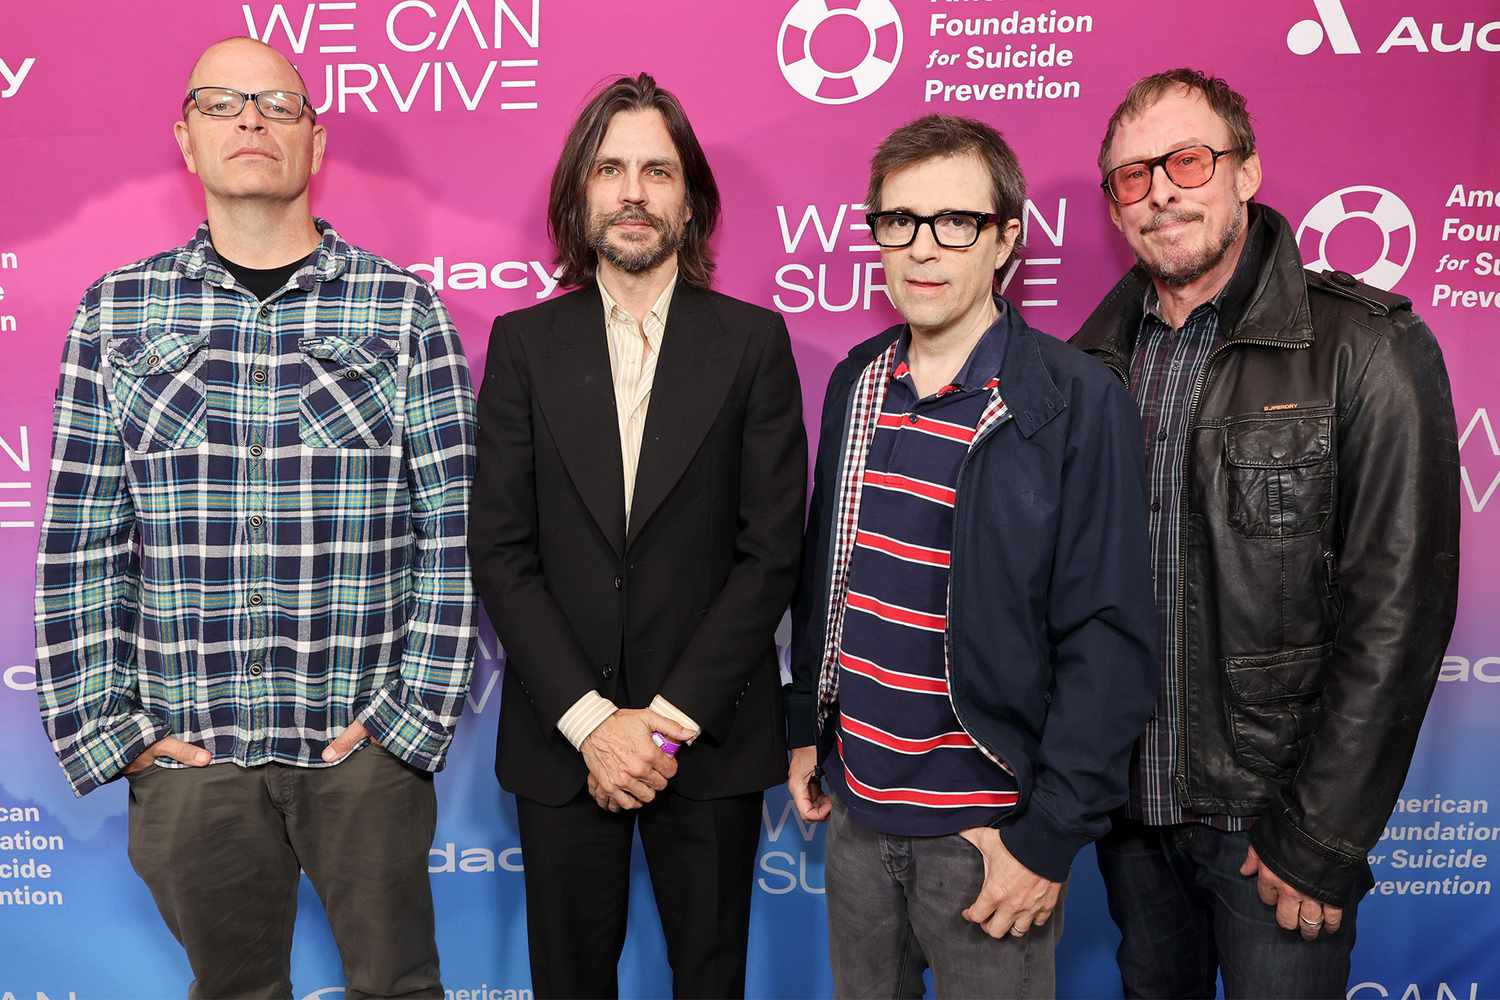 Patrick Wilson, Brian Bell, Rivers Cuomo and Scott Shriner of Weezer attend Audacy's 9th annual We Can Survive at Hollywood Bowl on October 22, 2022 in Los Angeles, California.